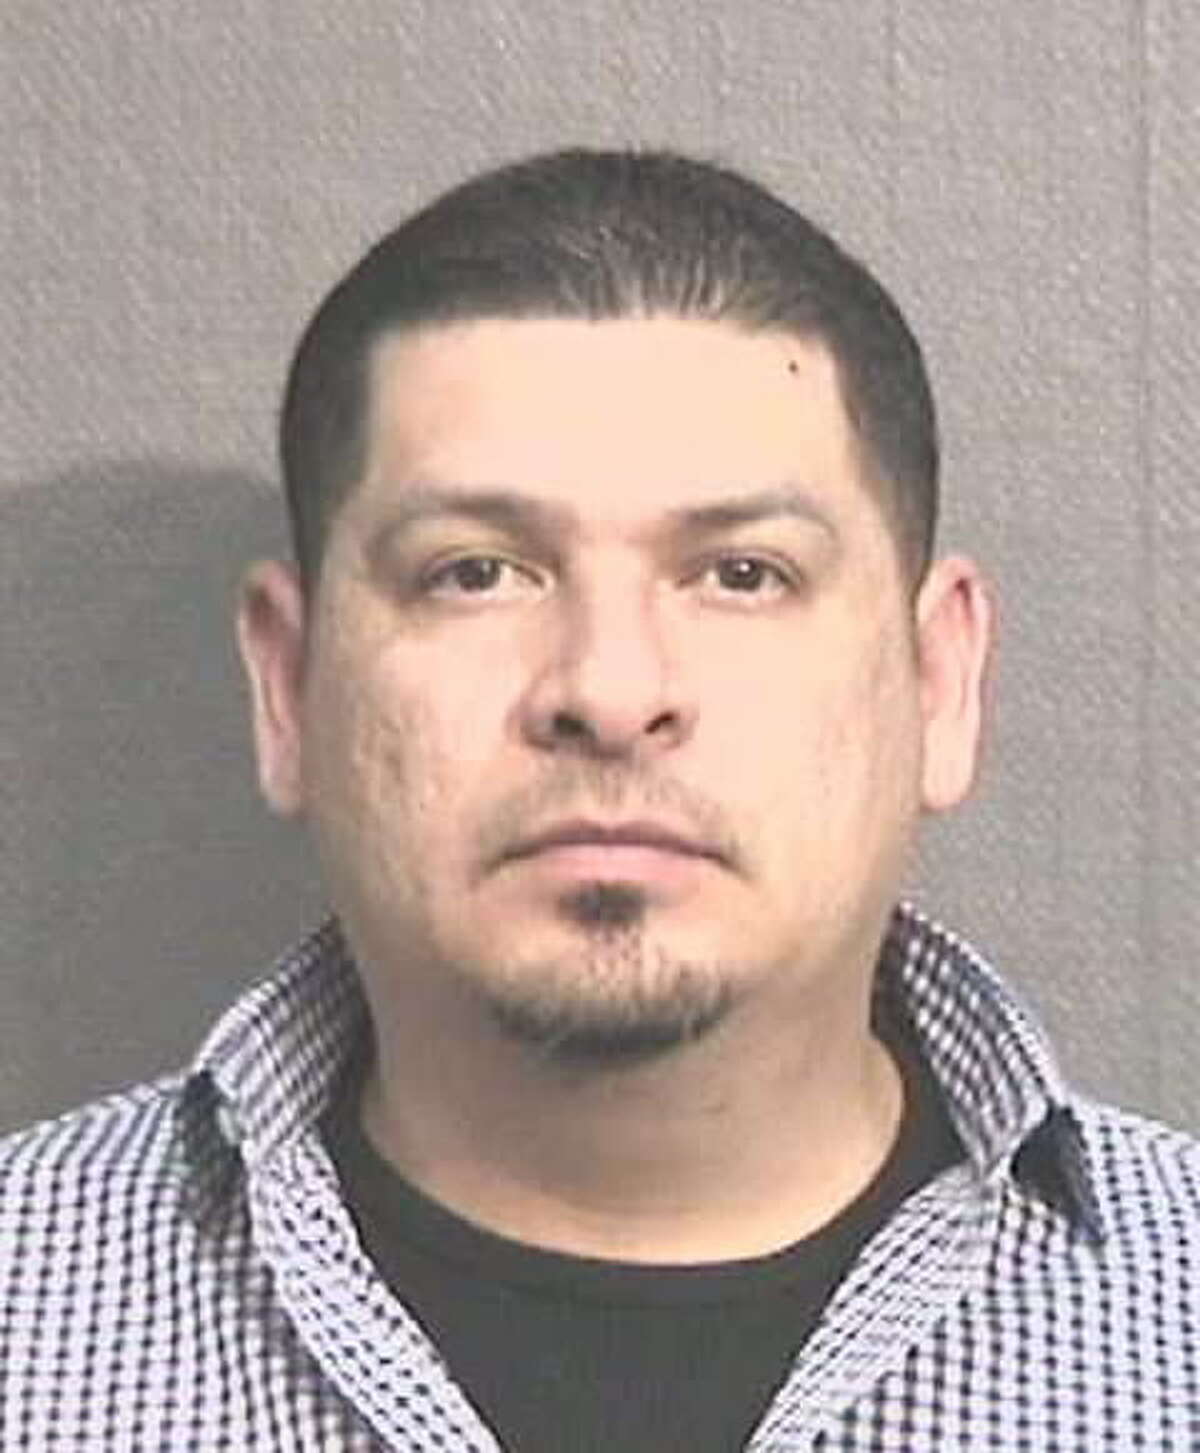 Isreal Suarez Lugo, 35 Charge: Intoxication manslaughter Victim: Giselle Luviano, 5 Date: Jan. 20, 2019